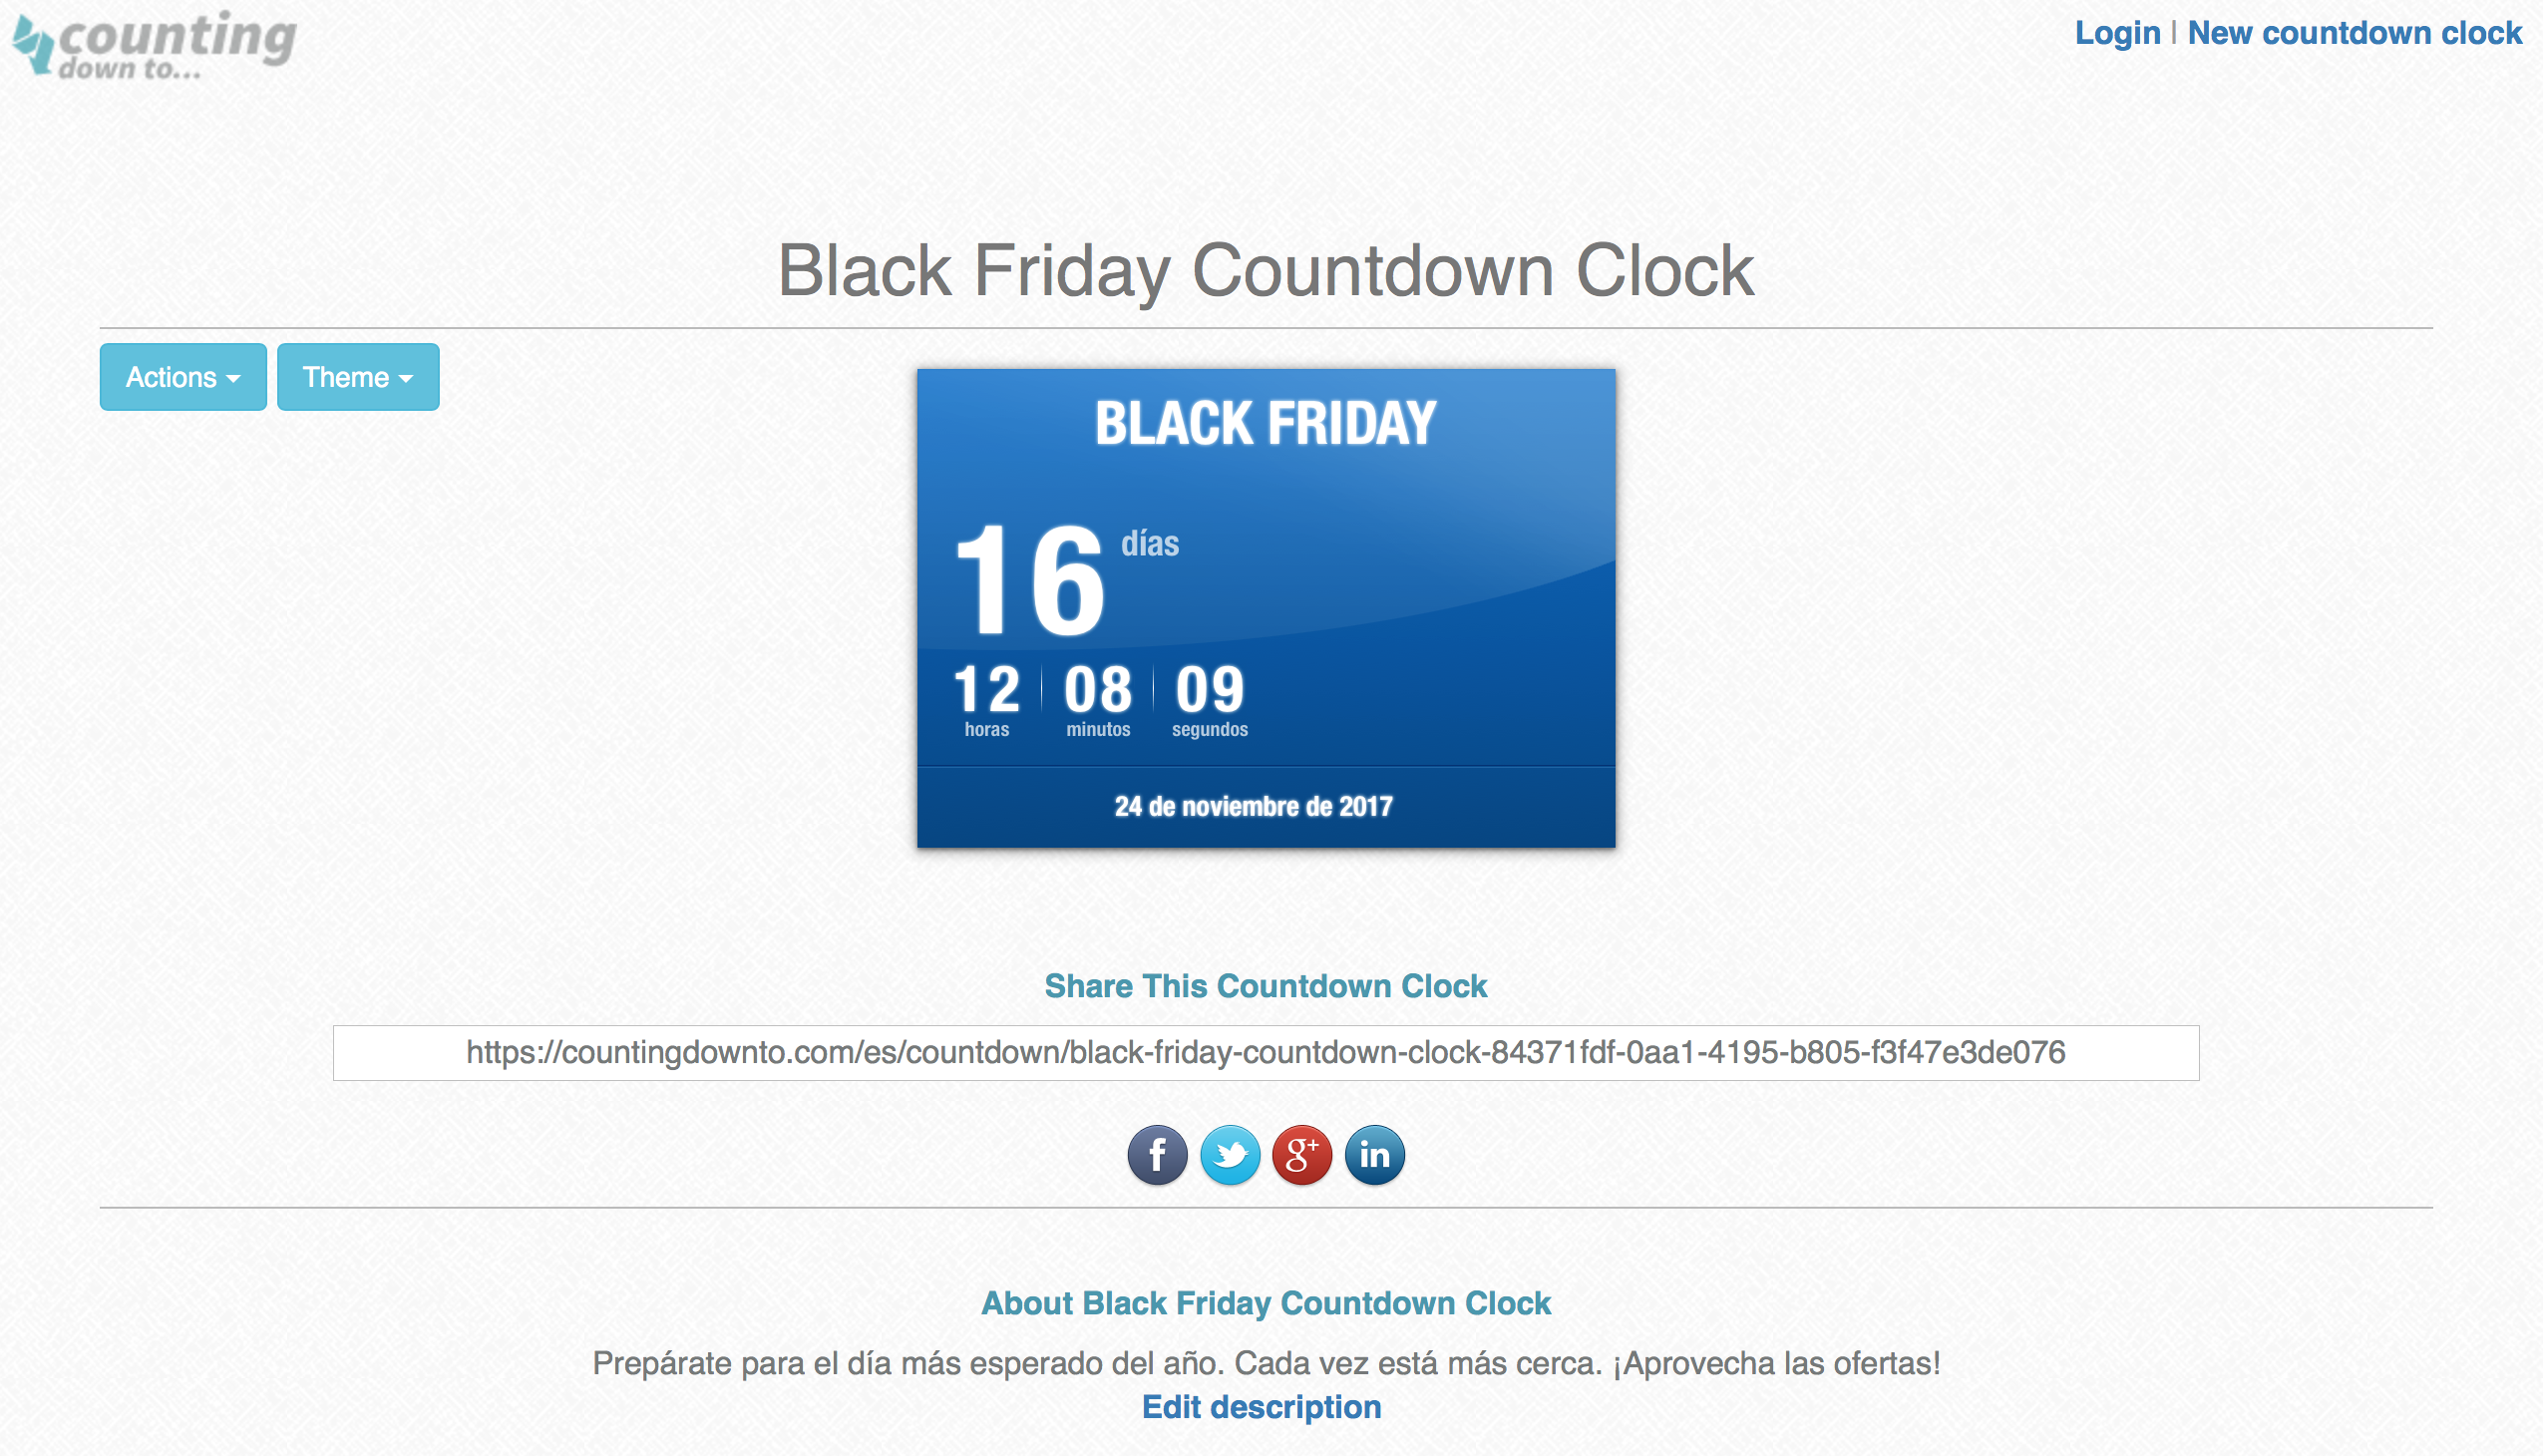 Inserts the url generated by counting down on your web